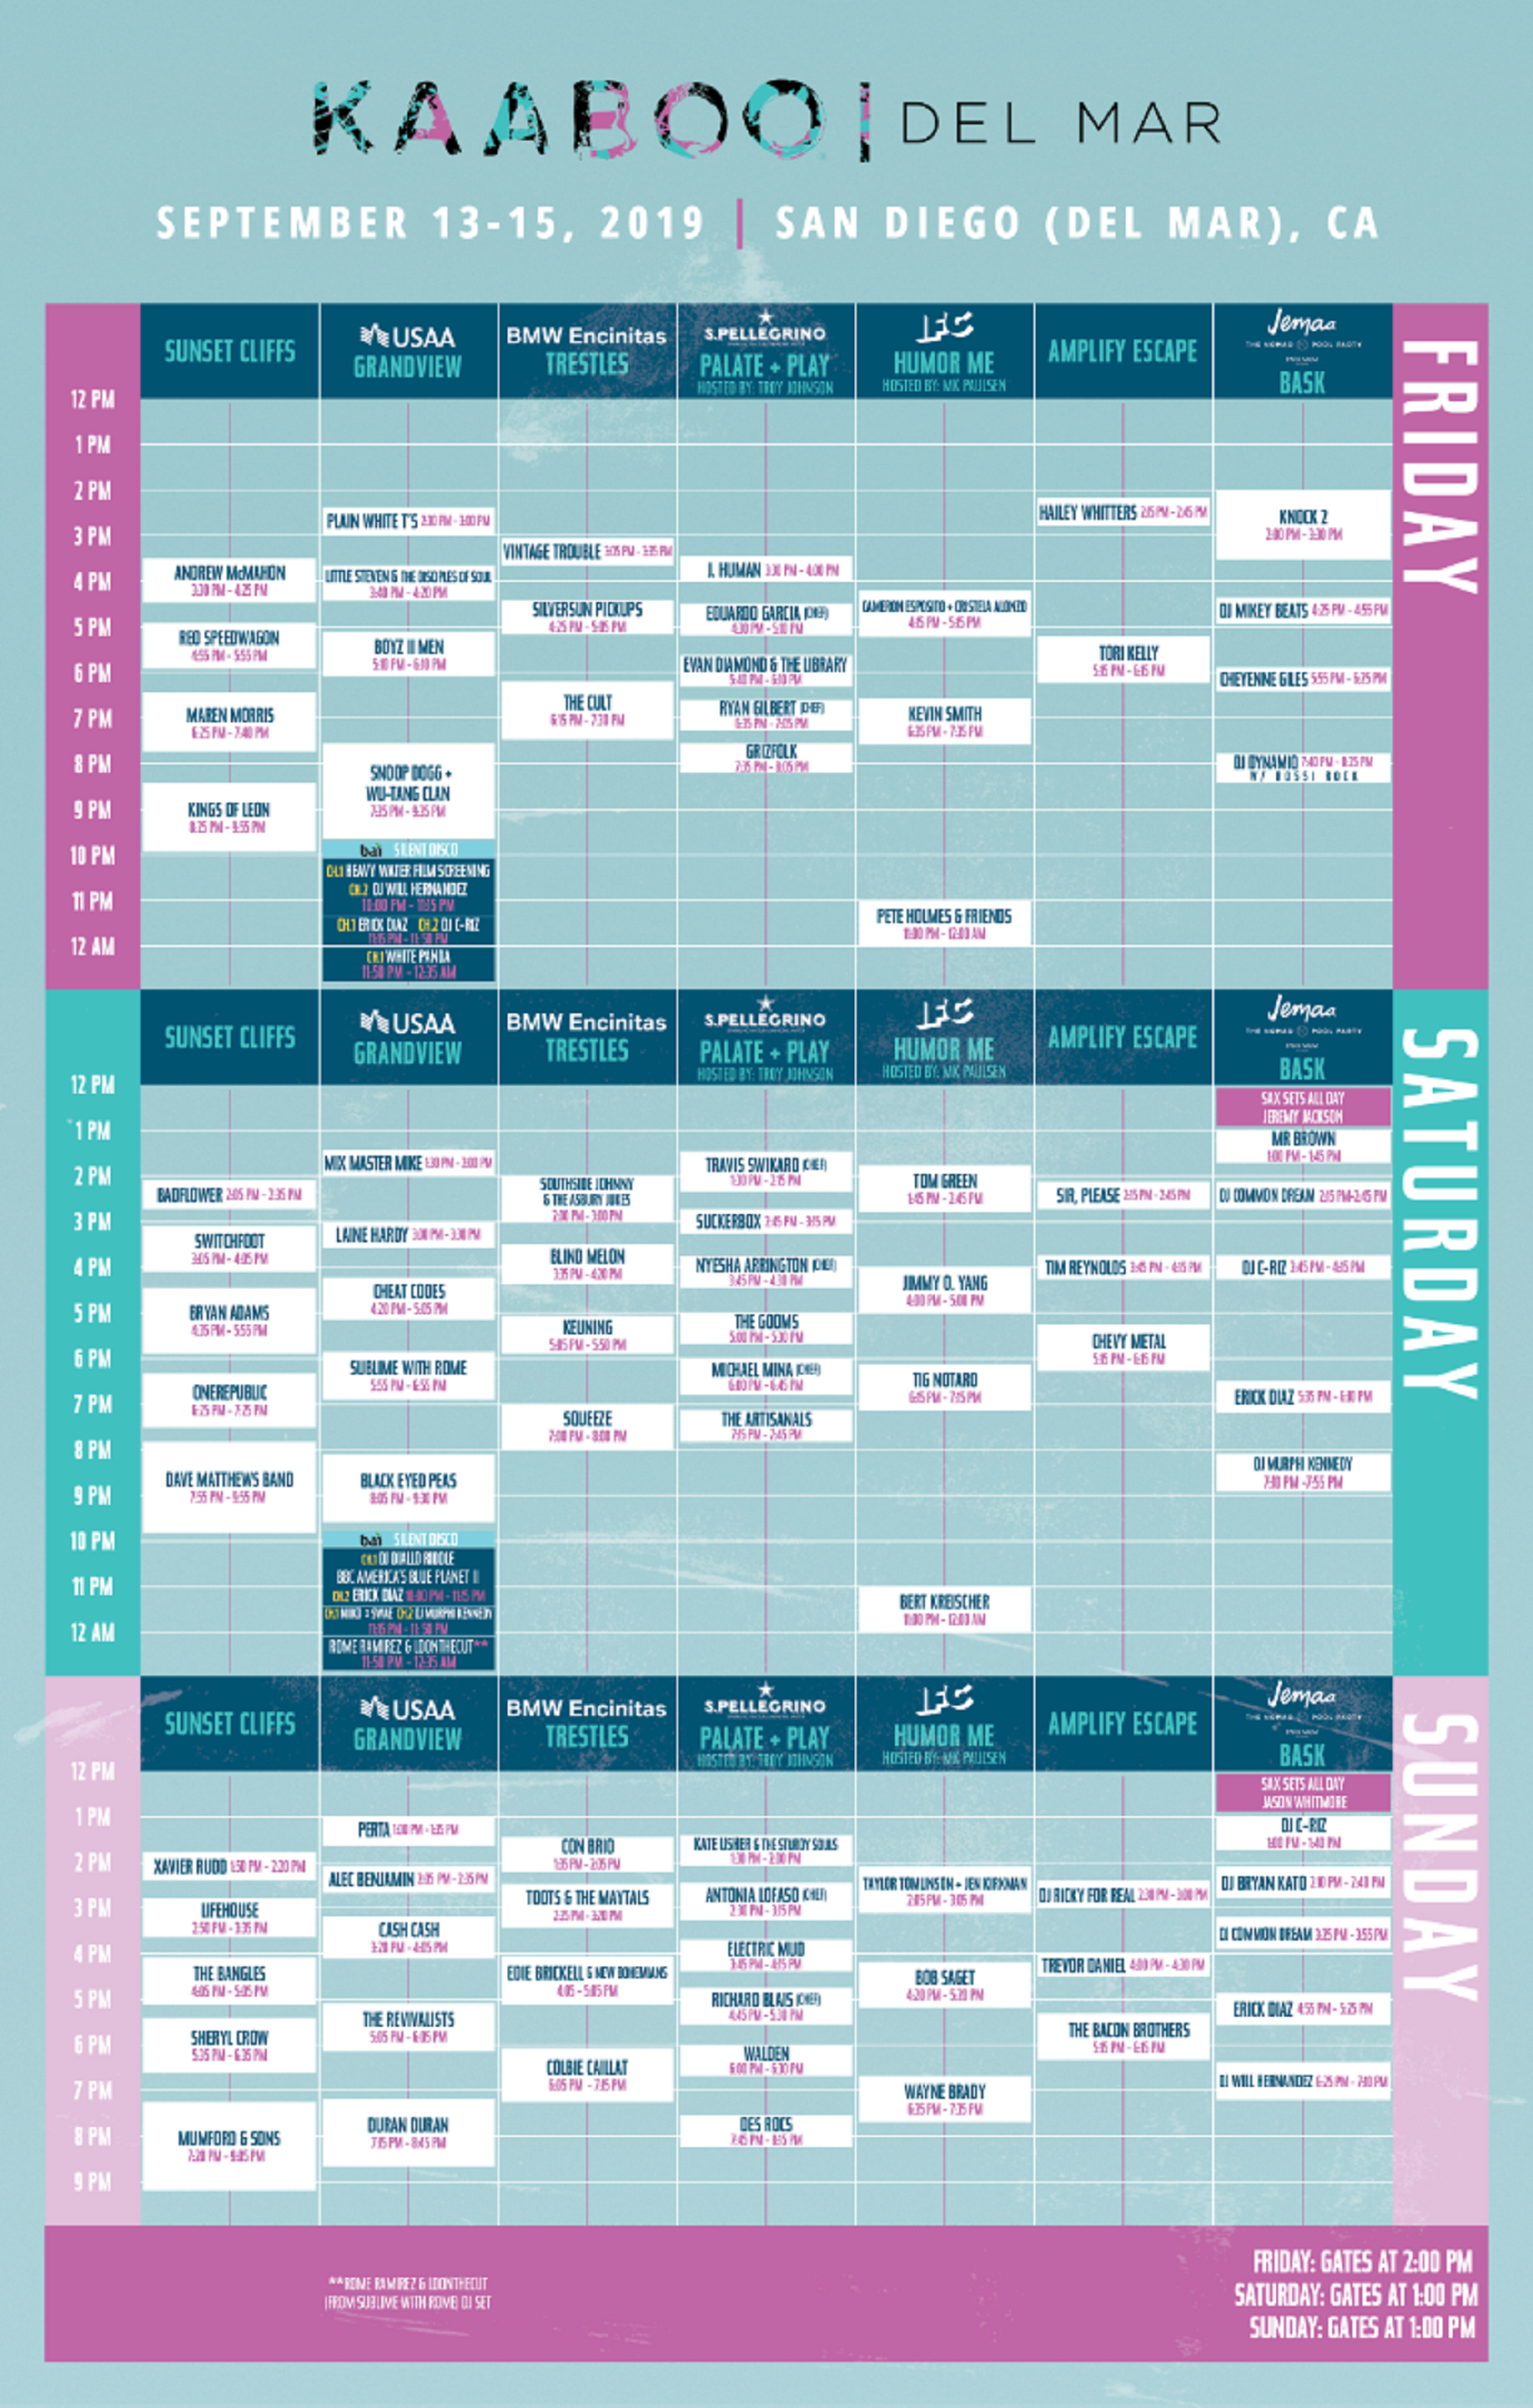 KAABOO Del Mar 2019 Daily Schedule Announced